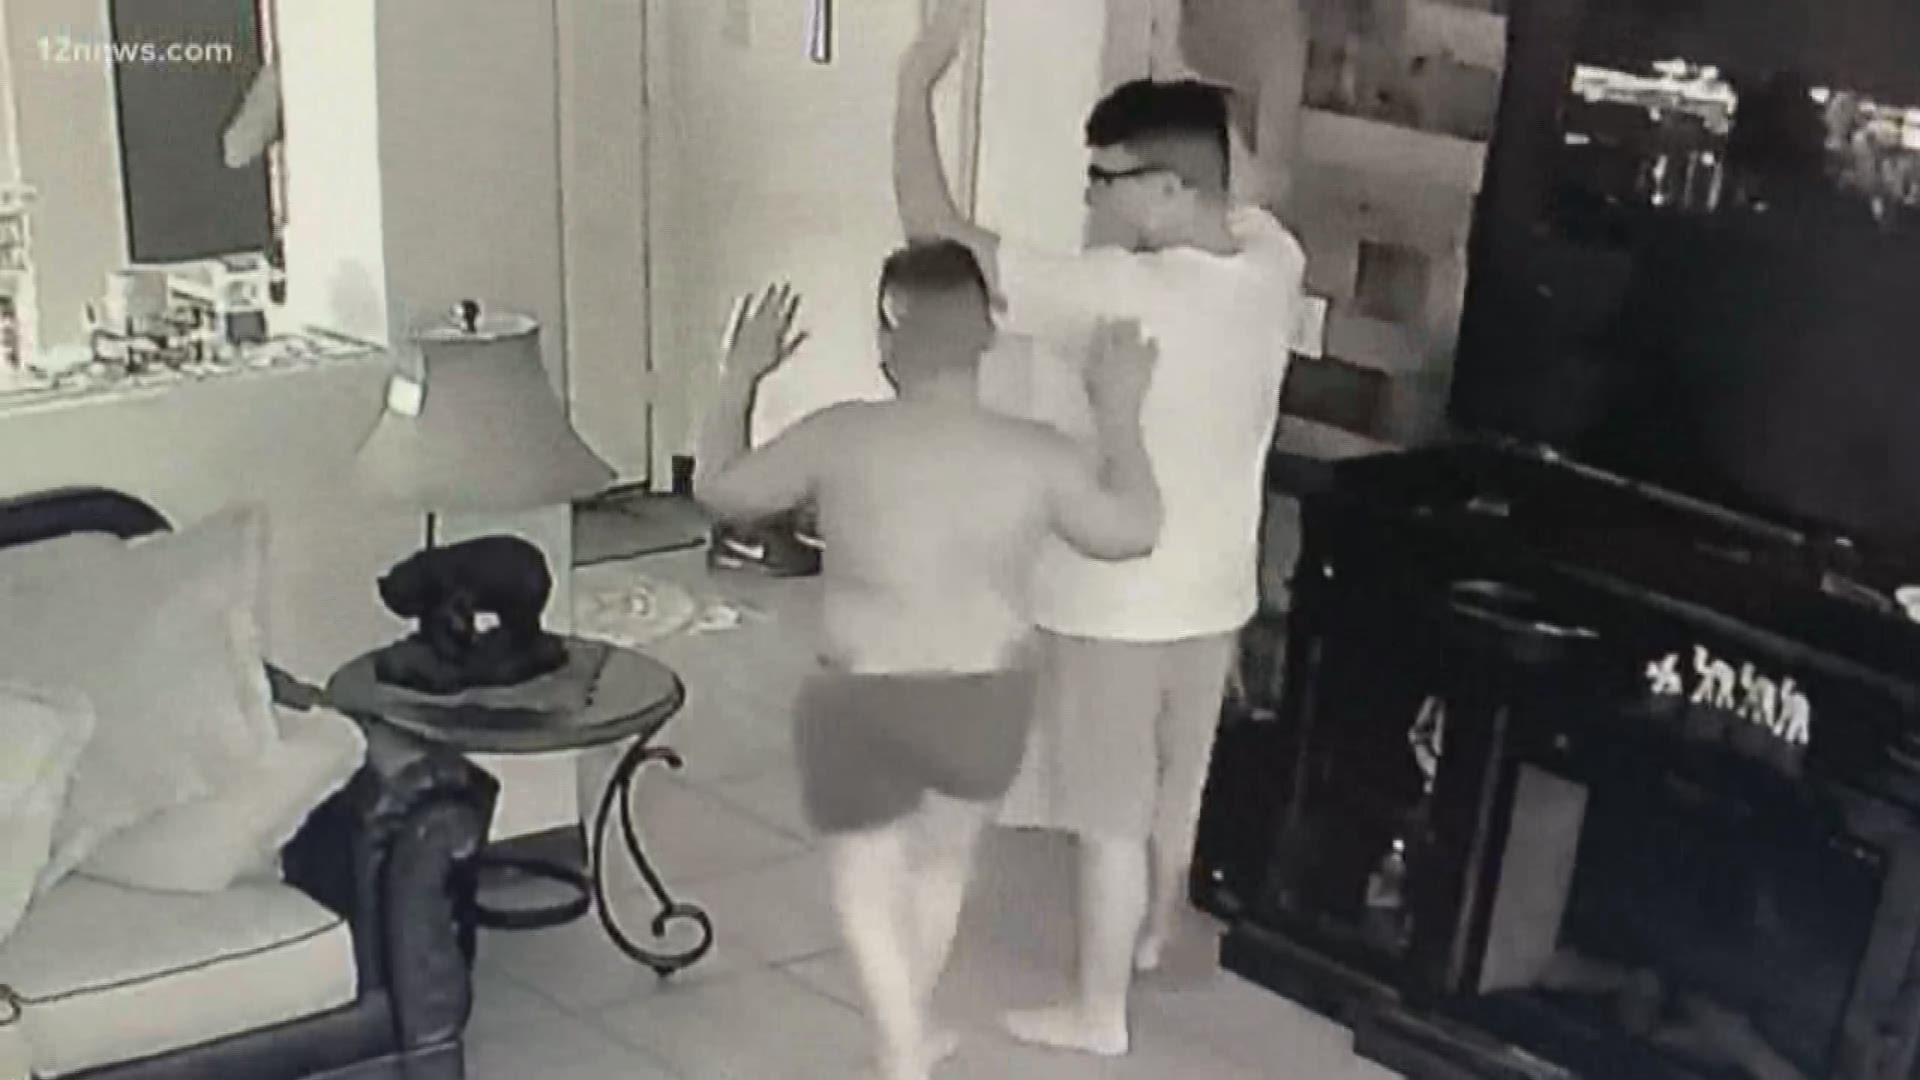 New details surrounding dramatic video showing Phoenix police raiding one man's home back in June. No charges have been filed against the man while his family maintains this was all without cause.